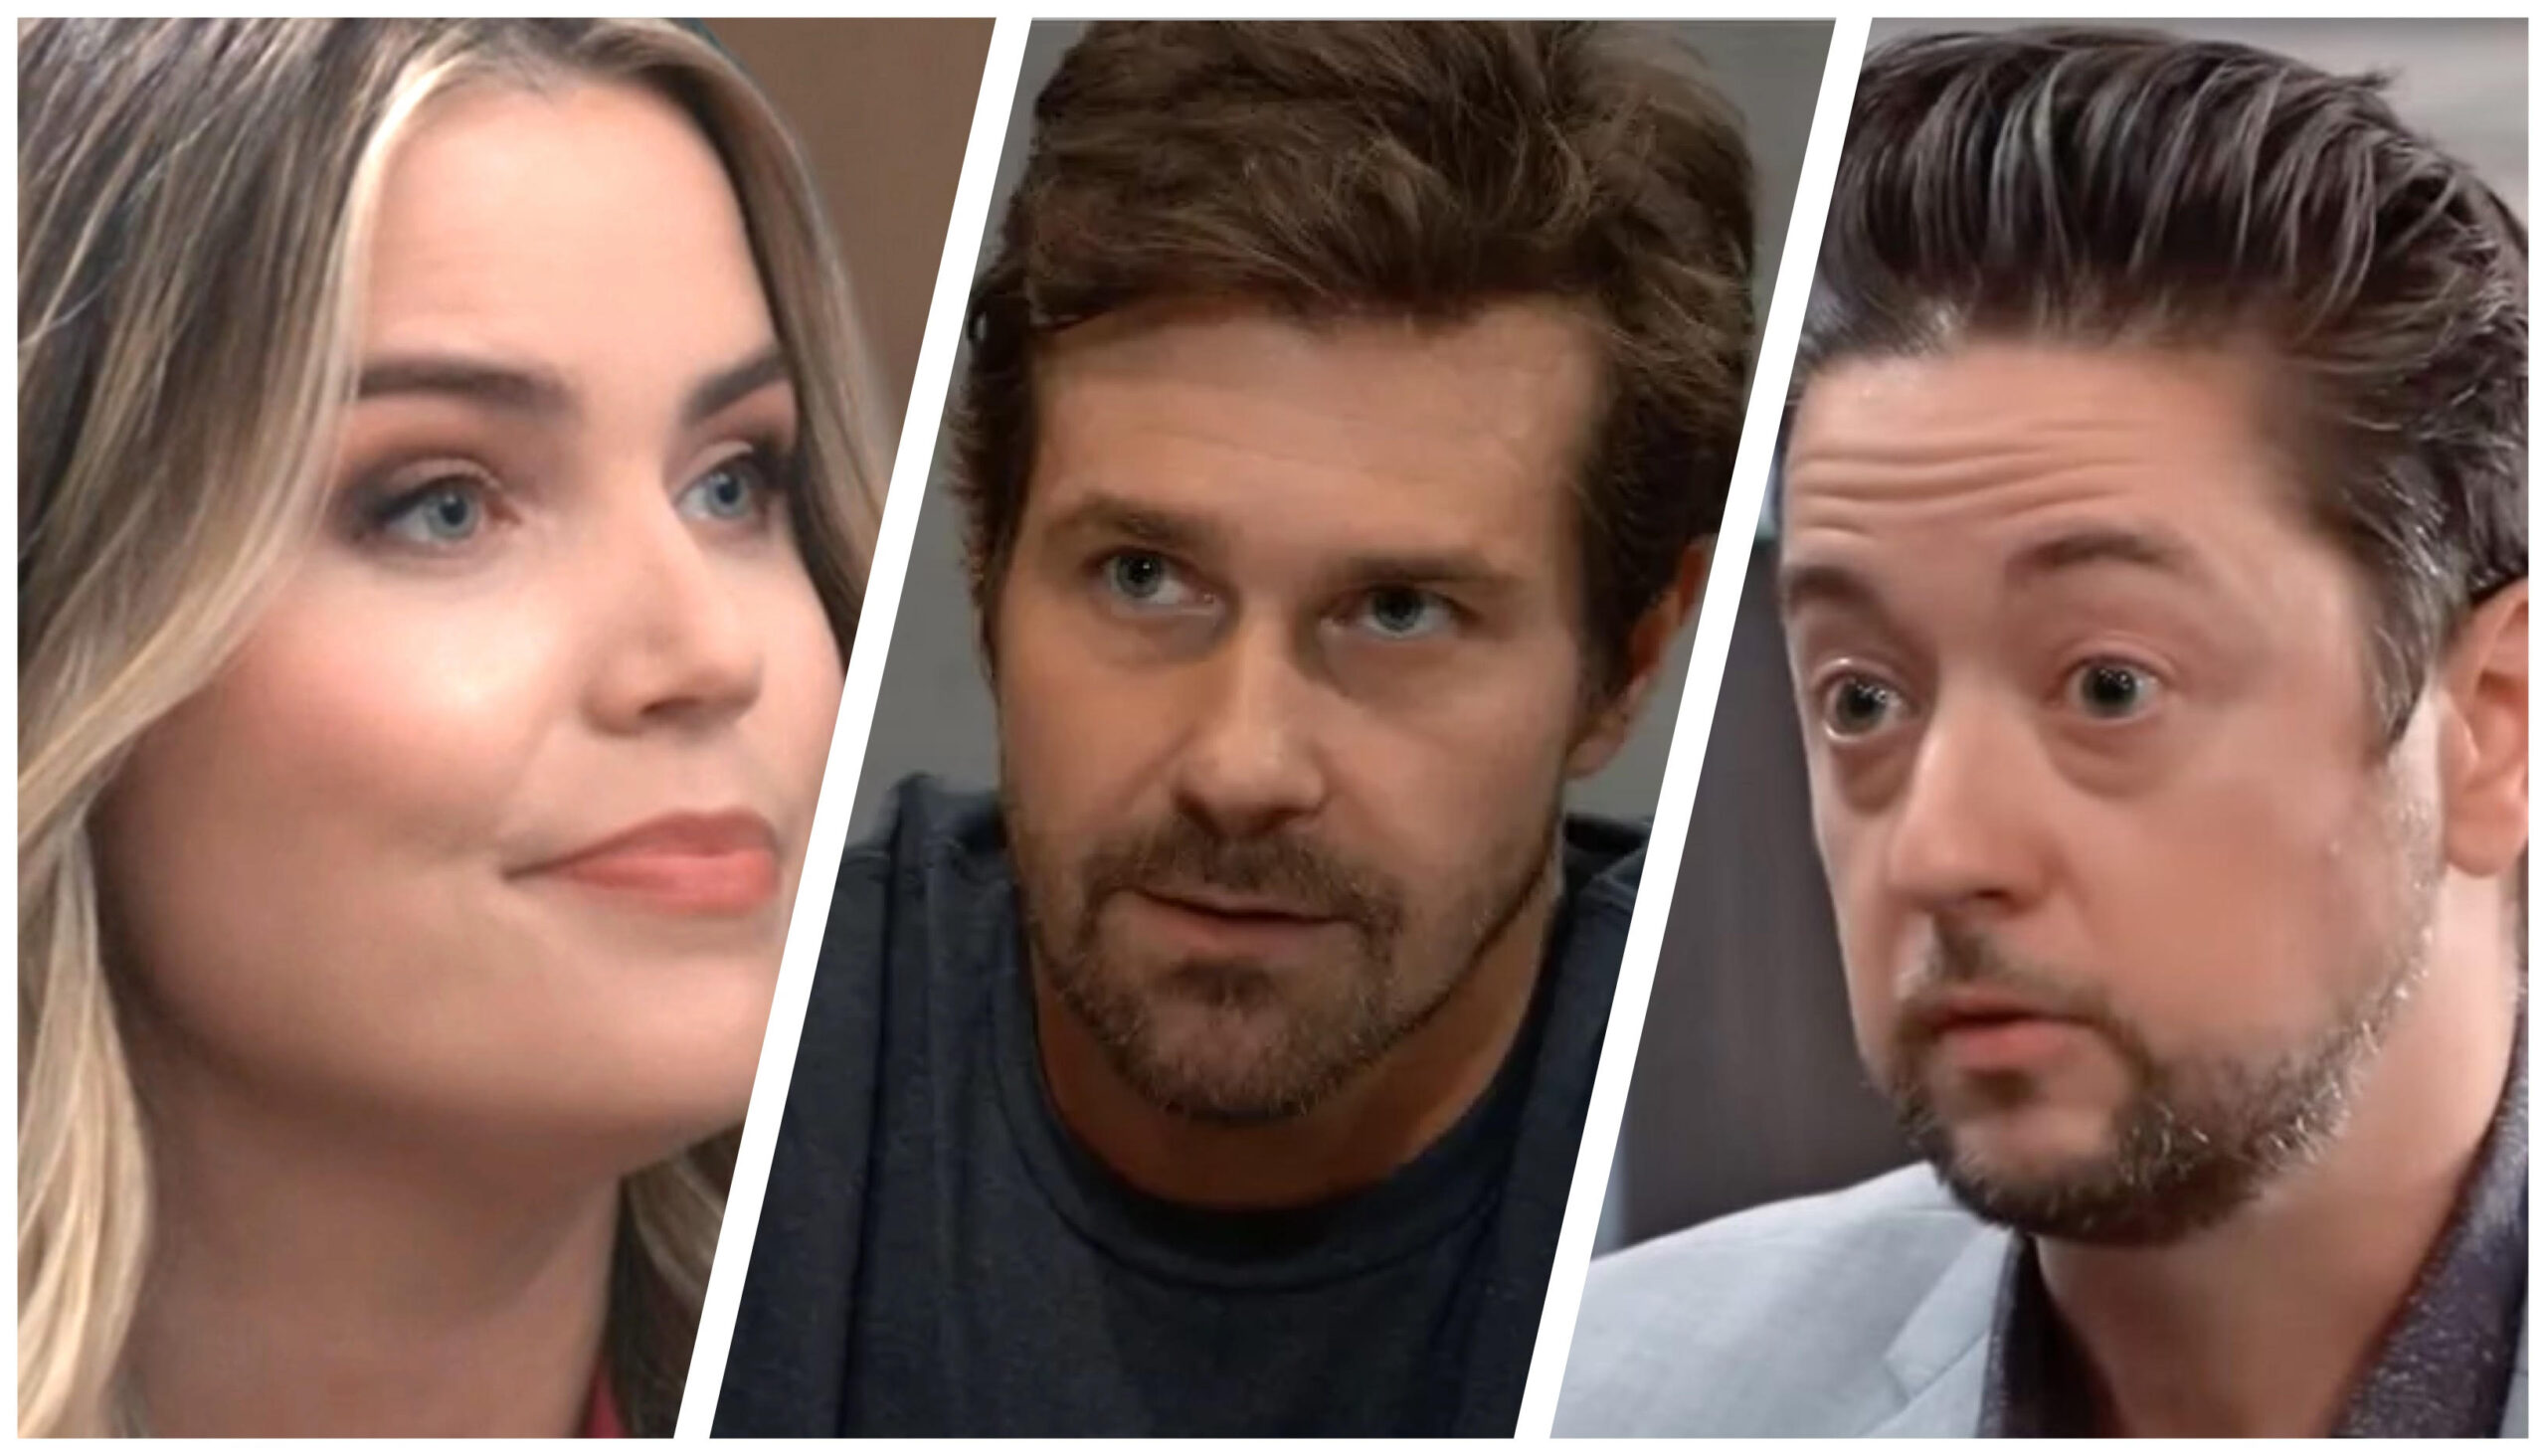 General Hospital spoilers Sasha Gilmore in the center Damian Spinelli on the left Cody Bell on the right